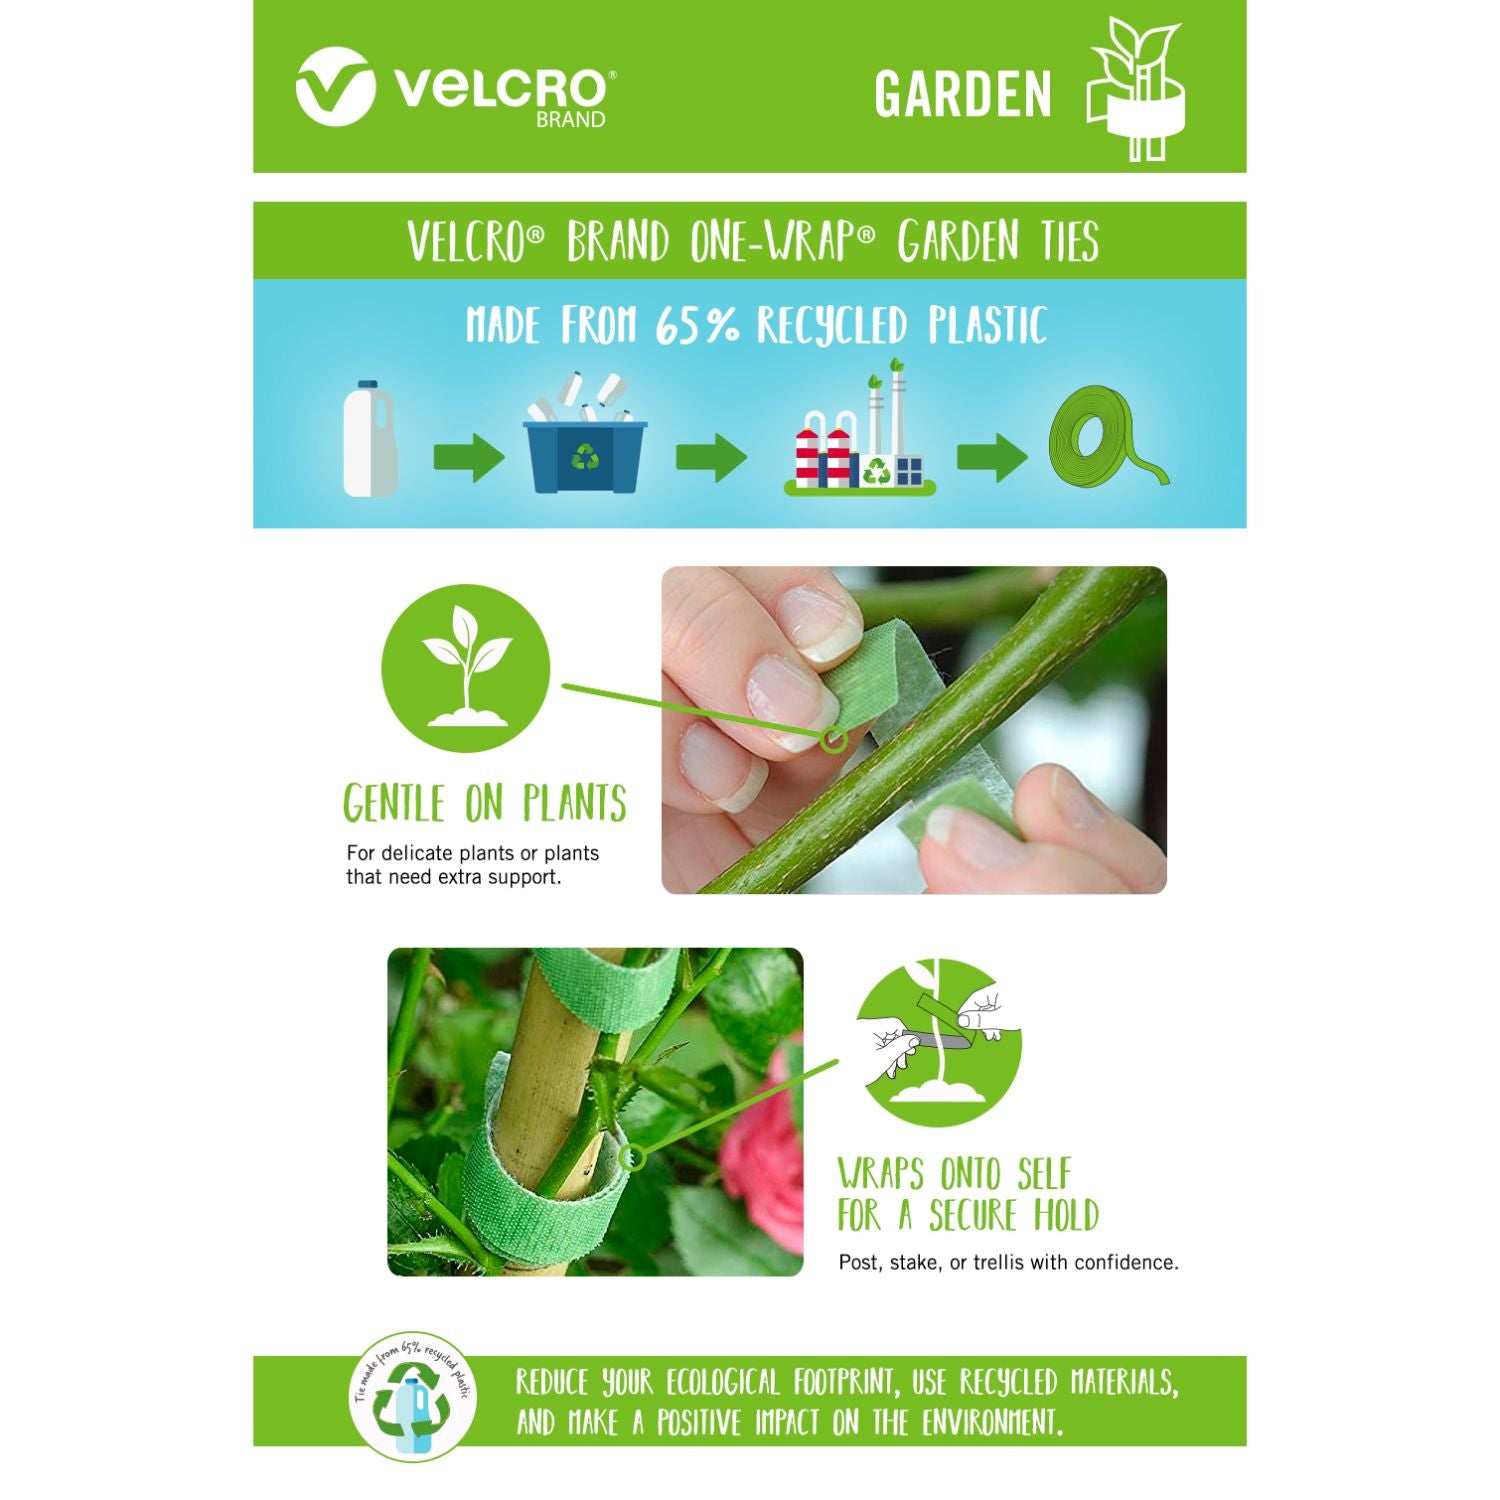 VELCRO® Brand Plant Ties are reusable, adjustable and gentle on plants.